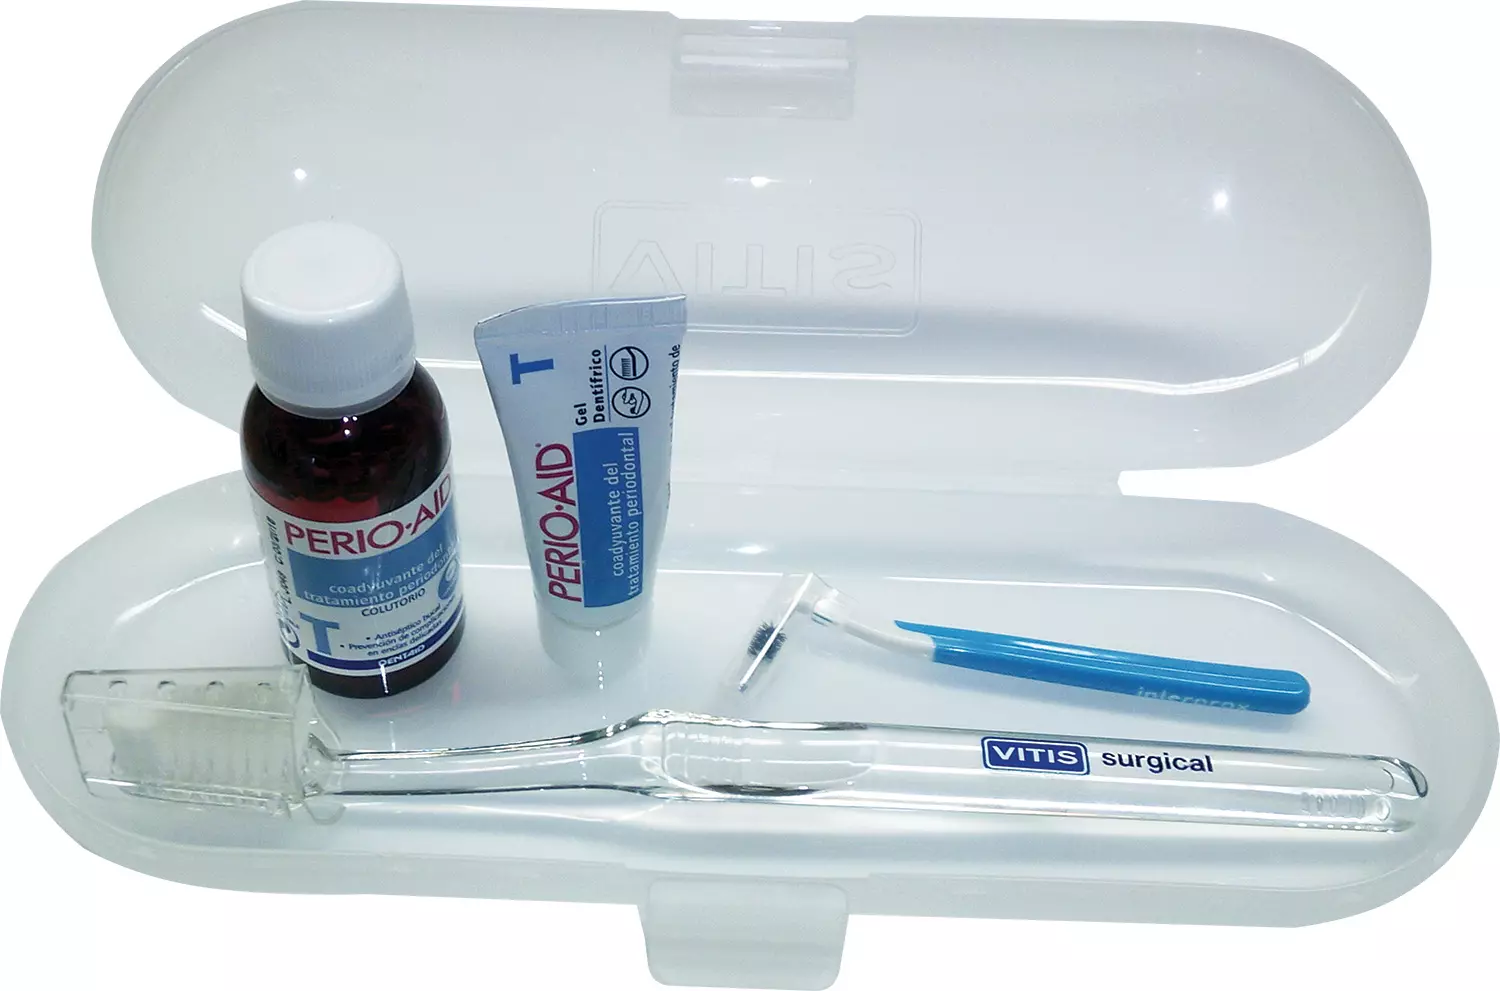 Perio Aid Kit 8 ml+30 ml+Surgical fogkefe+IPXconical (Blue)